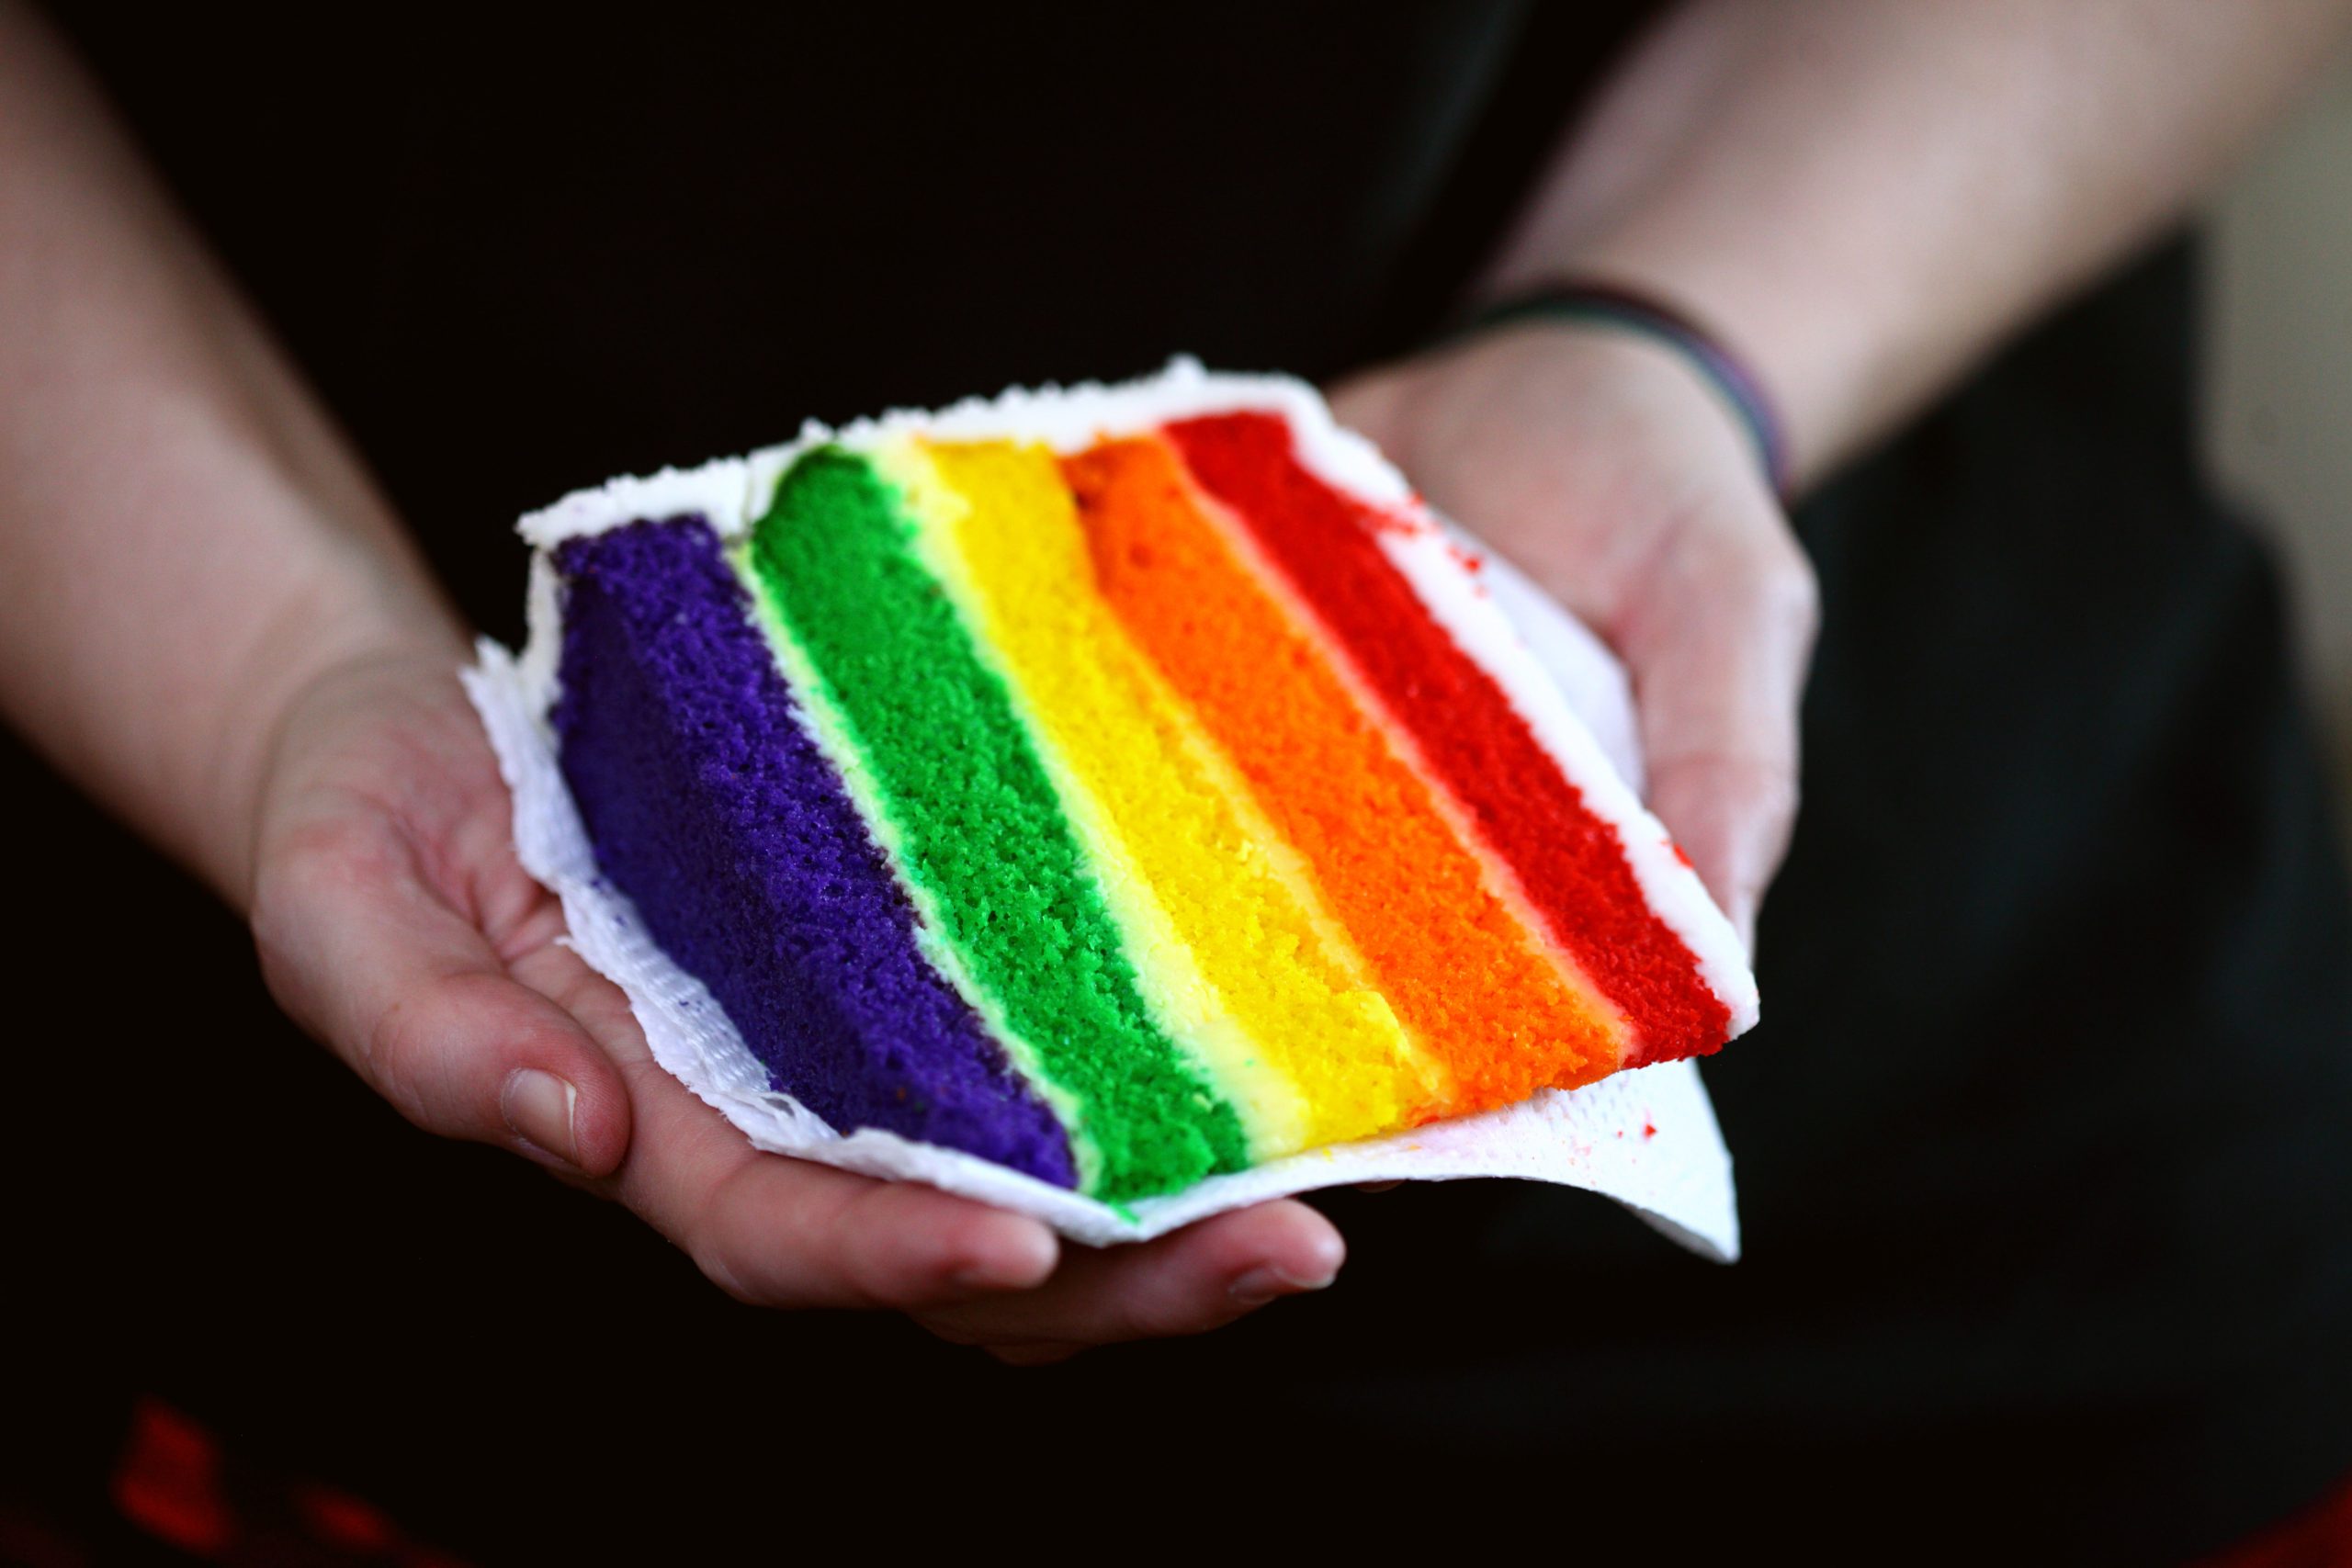 in article about national coming out day, a person holding a rainbow cake